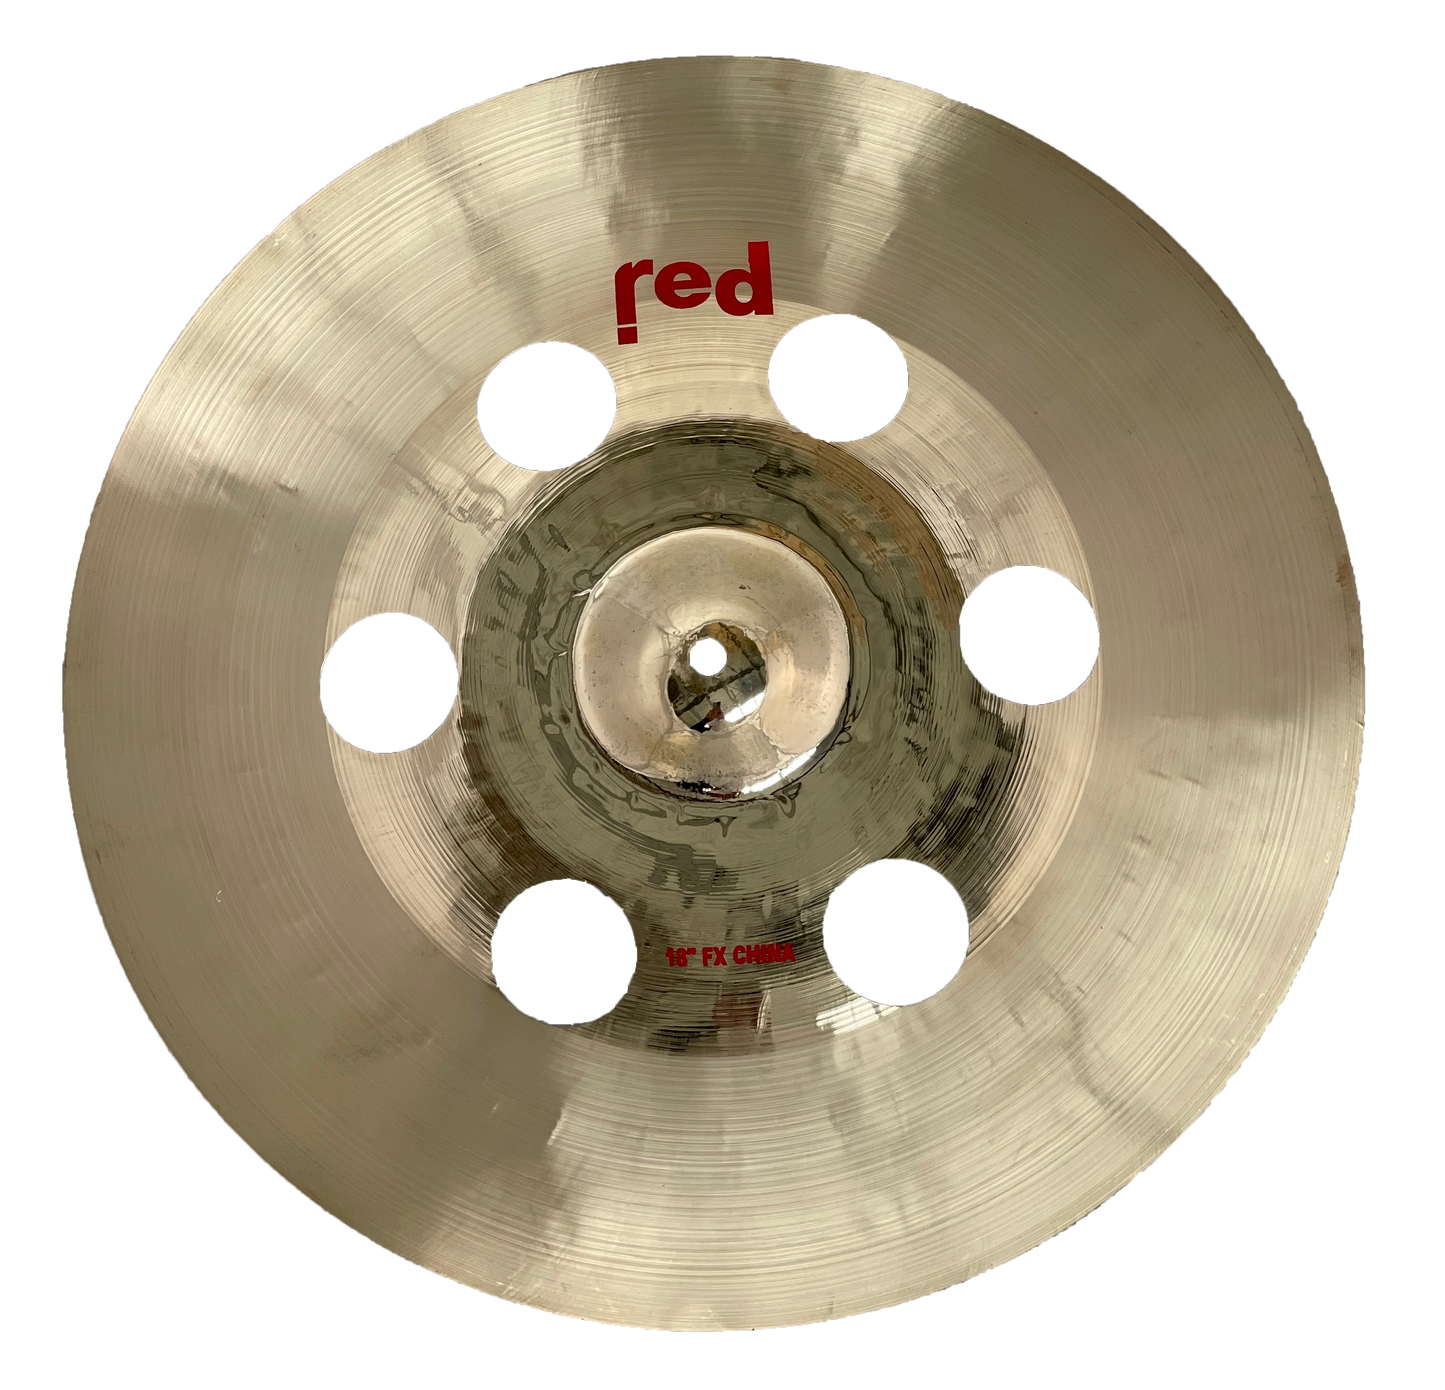 Red Cymbals Bright Hybrid Series fx China Cymbal